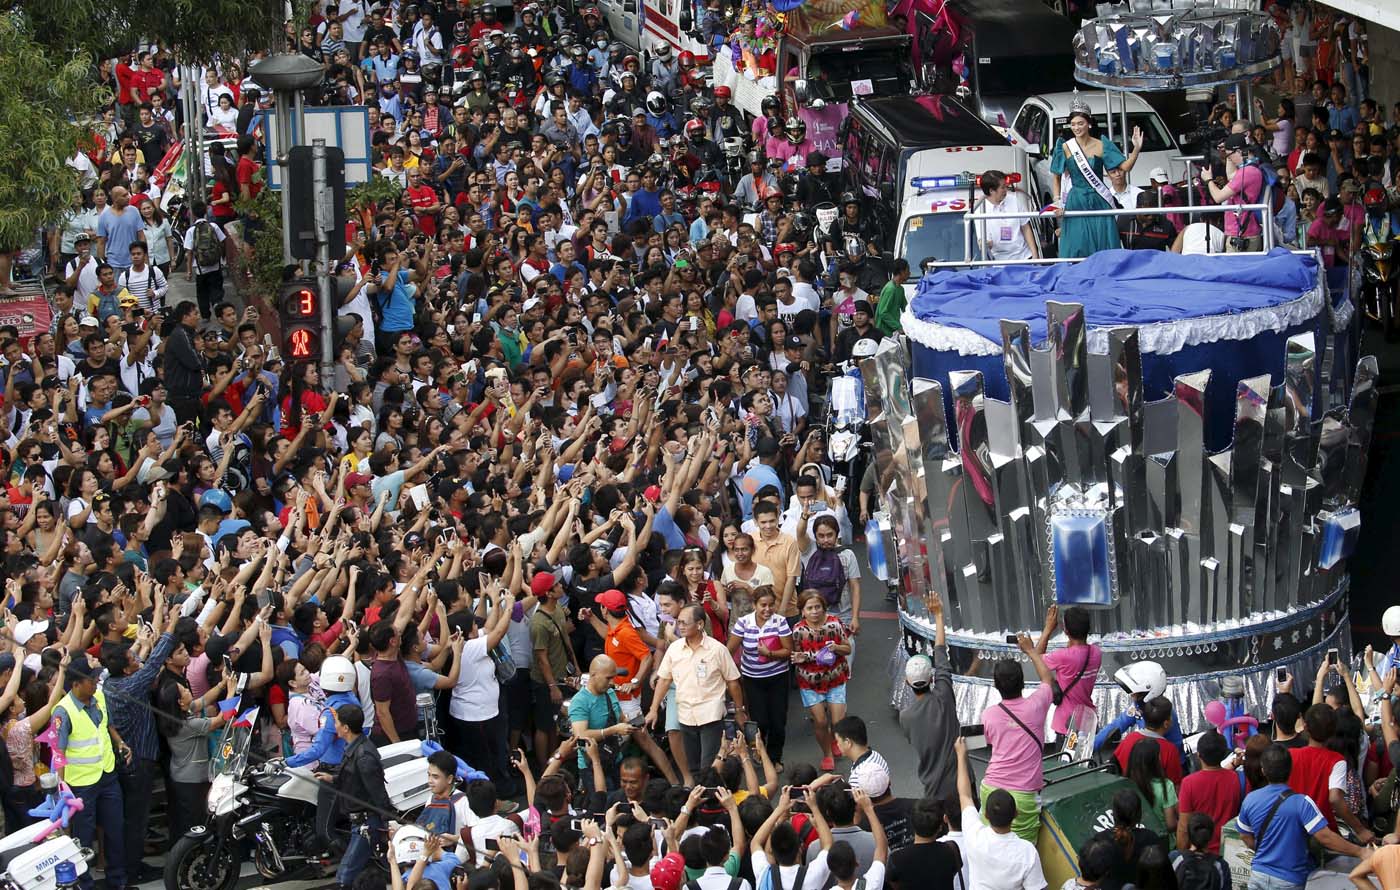 Miss Universe 2015 Pia Alonzo Wurtzbach waves to the crowd as her motorcade passes along a busy street in Manila, January 25, 2016. Wurtzbach, the first Miss Universe from the Philippines in more than four decades, said on Sunday she will spend her reign bringing awareness to issues like HIV and draw support for countries vulnerable to disasters.  REUTERS/Erik De Castro